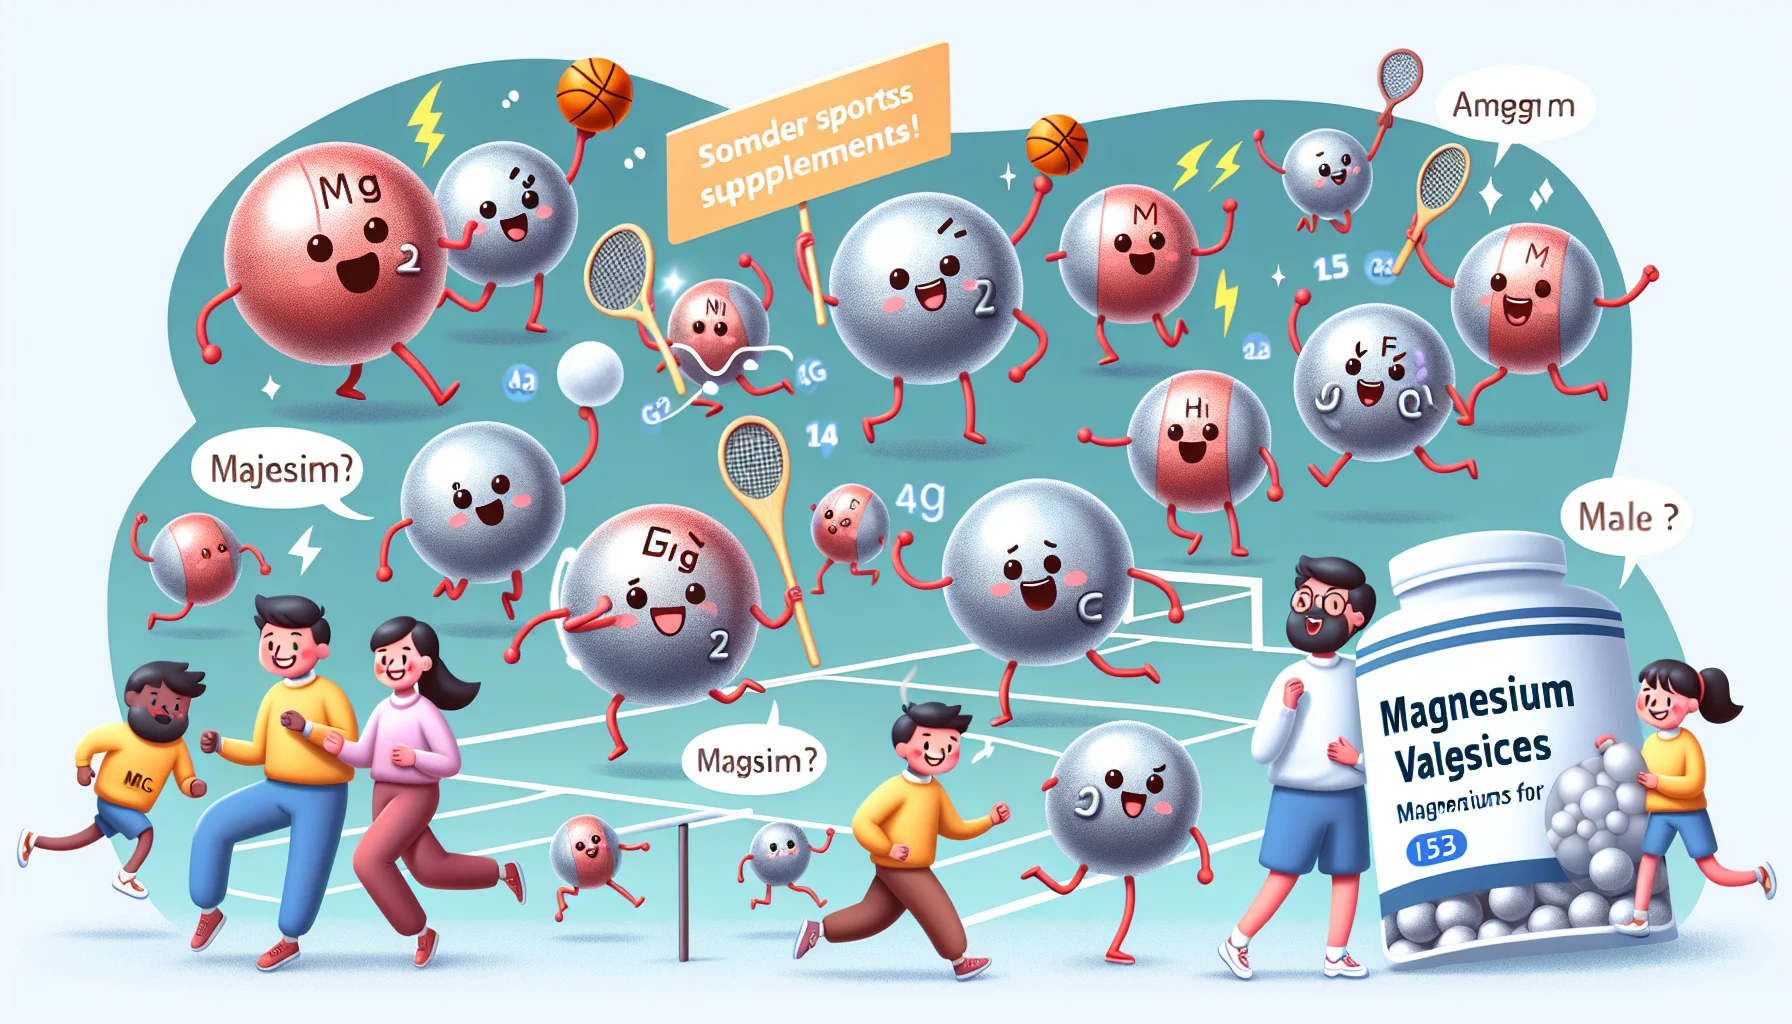 Imagine an amusing scene depicting magnesium valence electrons. These miniscule entities are personified with cartoonish style faces, joyfully participating in various sports activities representing the energy that they can provide. Some are seen dribbling a basketball, others are running a marathon, while a couple are teamed together, playing a game of doubles in tennis. They're calling out to a healthy person of Asian descent, male, who is considering some sports supplements. The cute electrons, representing the health benefits of magnesium, complement the scene, strongly suggesting him to consider magnesium supplements for his sports activities.